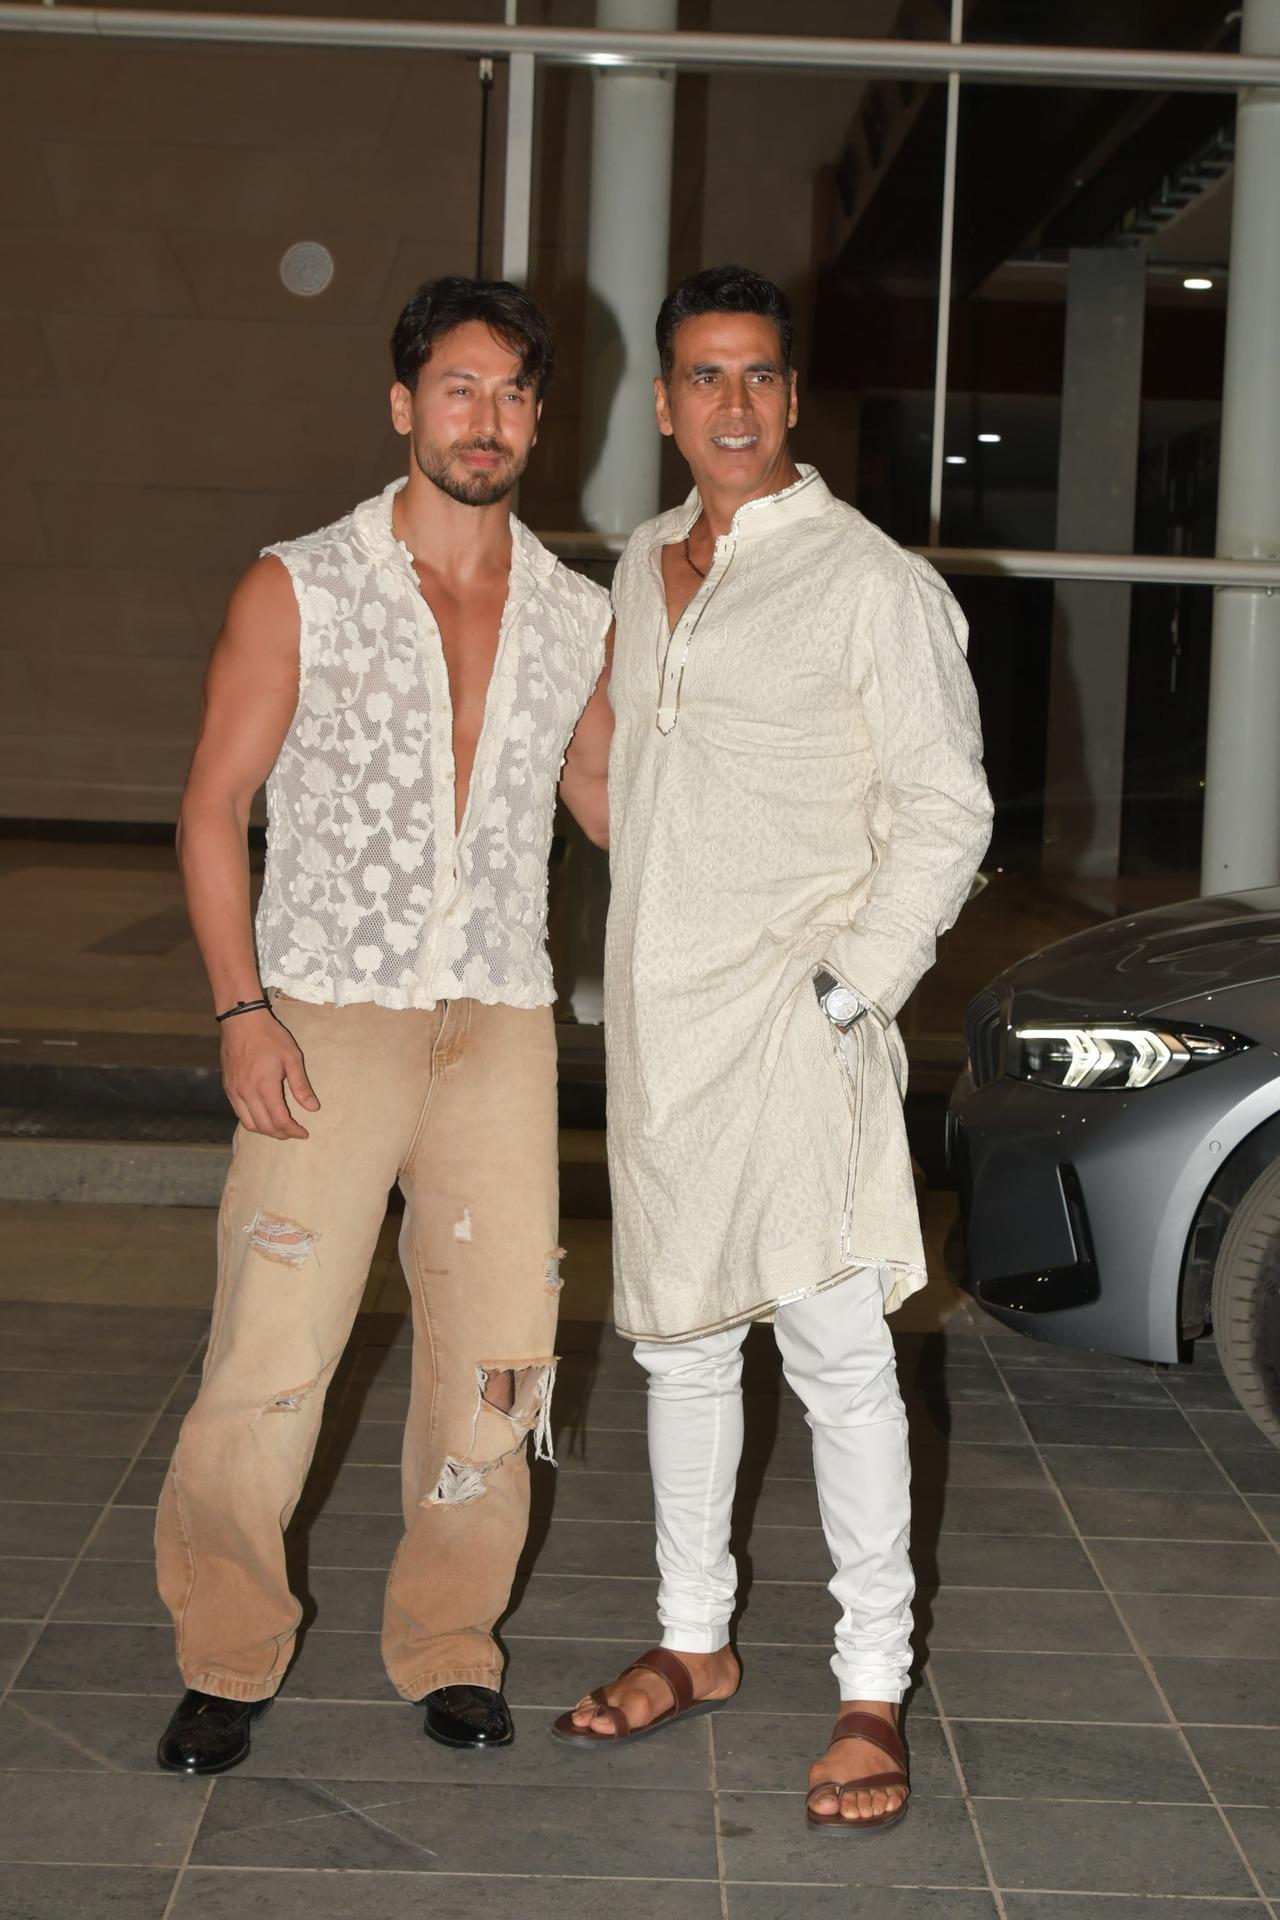 ‘Bade Miyan Chote Miyan’ director Ali Abbas Zafar hosted an Iftaar party for the cast and makers on Sunday evening. The film’s lead pair Akshay Kumar and Tiger Shroff came together for the event. 